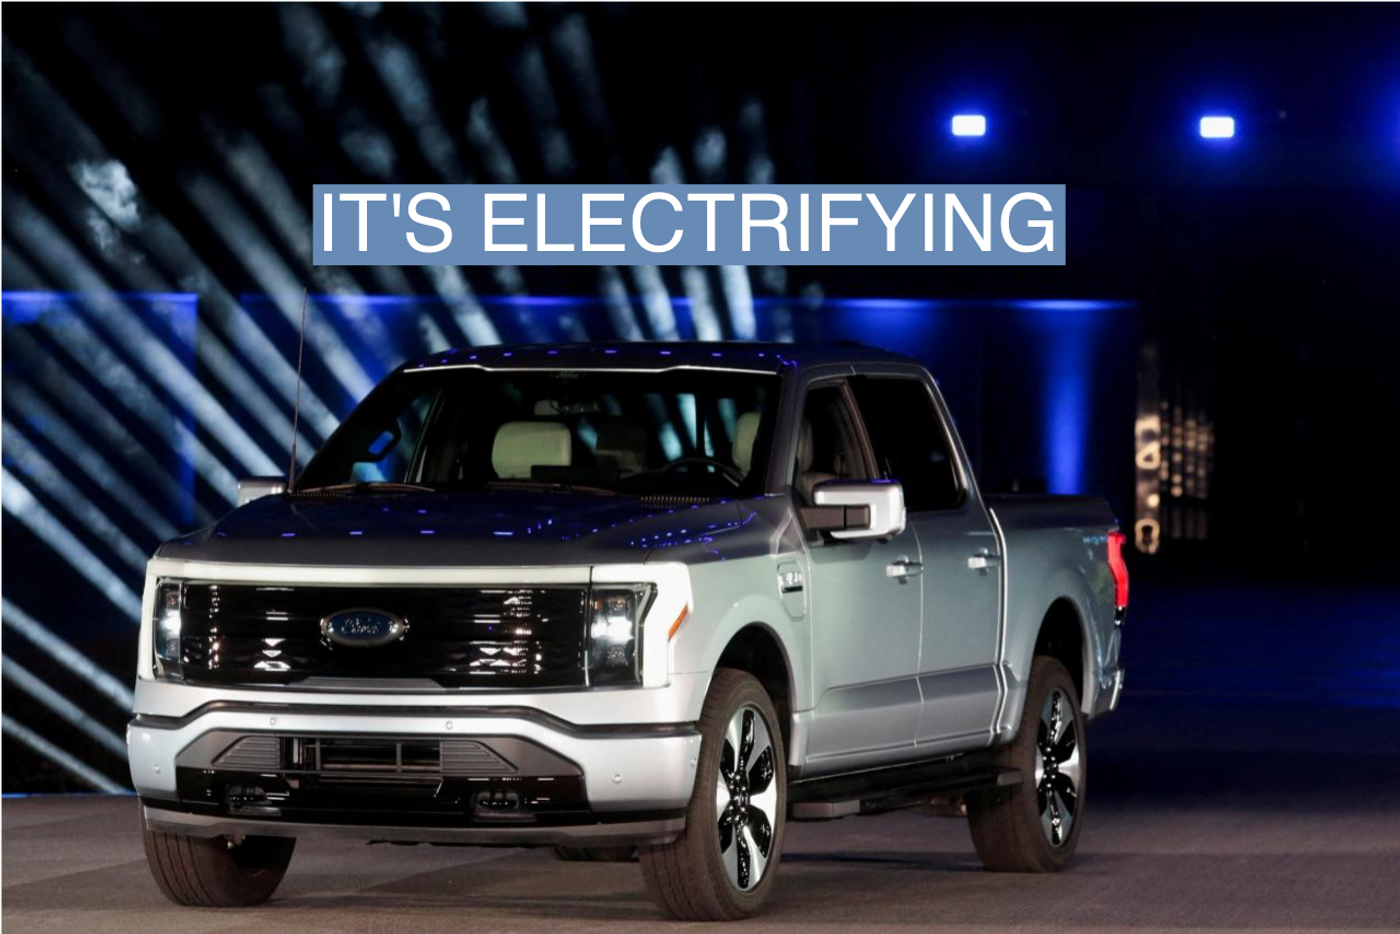 The all-electric Ford F-150 Lightning pickup truck is unveiled at the company's world headquarters in Dearborn, Michigan.